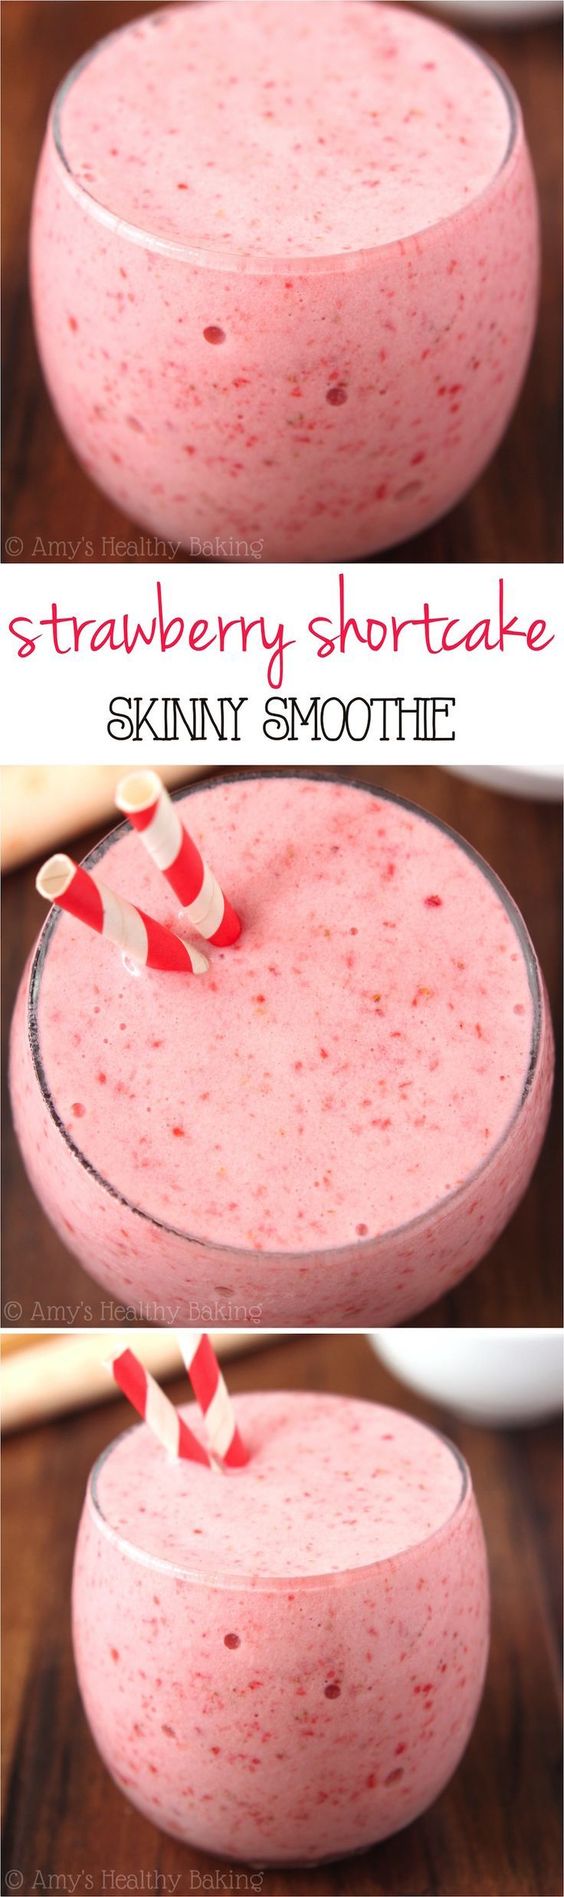 Learn how healthy breakfast smoothies can assist weight loss in this health guide. Discover the best detox smoothies to shed belly weight. #healthy #healthier #fitnessgoals #wellness #nutrition #healthyrecipes #weightloss #mealprep #nobake #healthylifestyle 